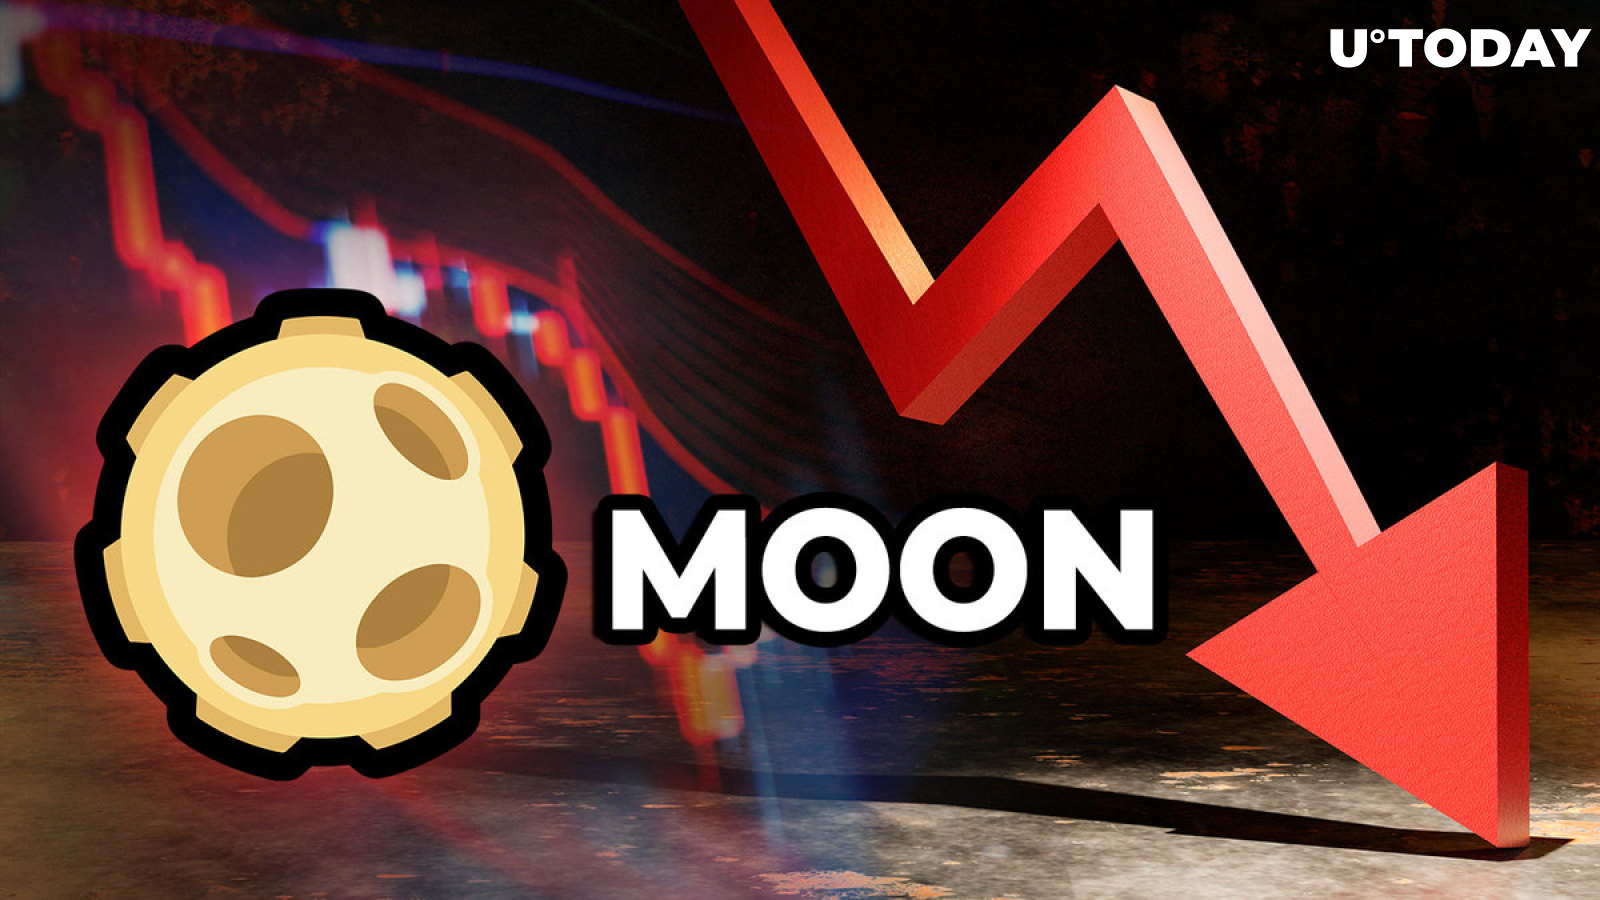 Reddit's Cryptocurrency MOON Plummets by 90%, Community Furious